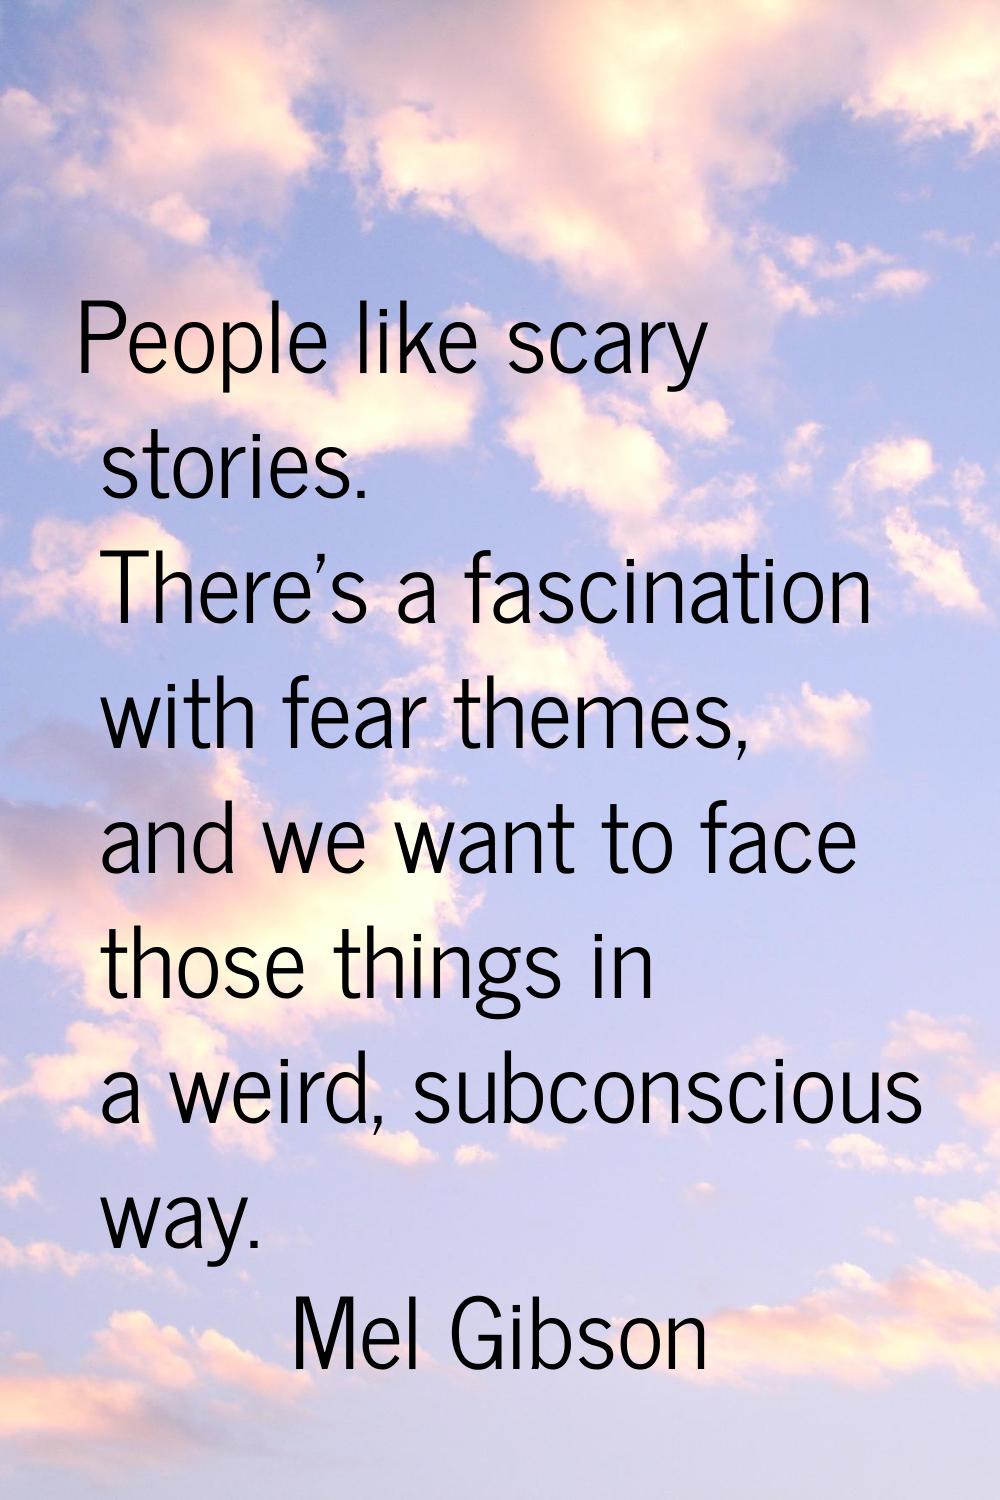 People like scary stories. There's a fascination with fear themes, and we want to face those things